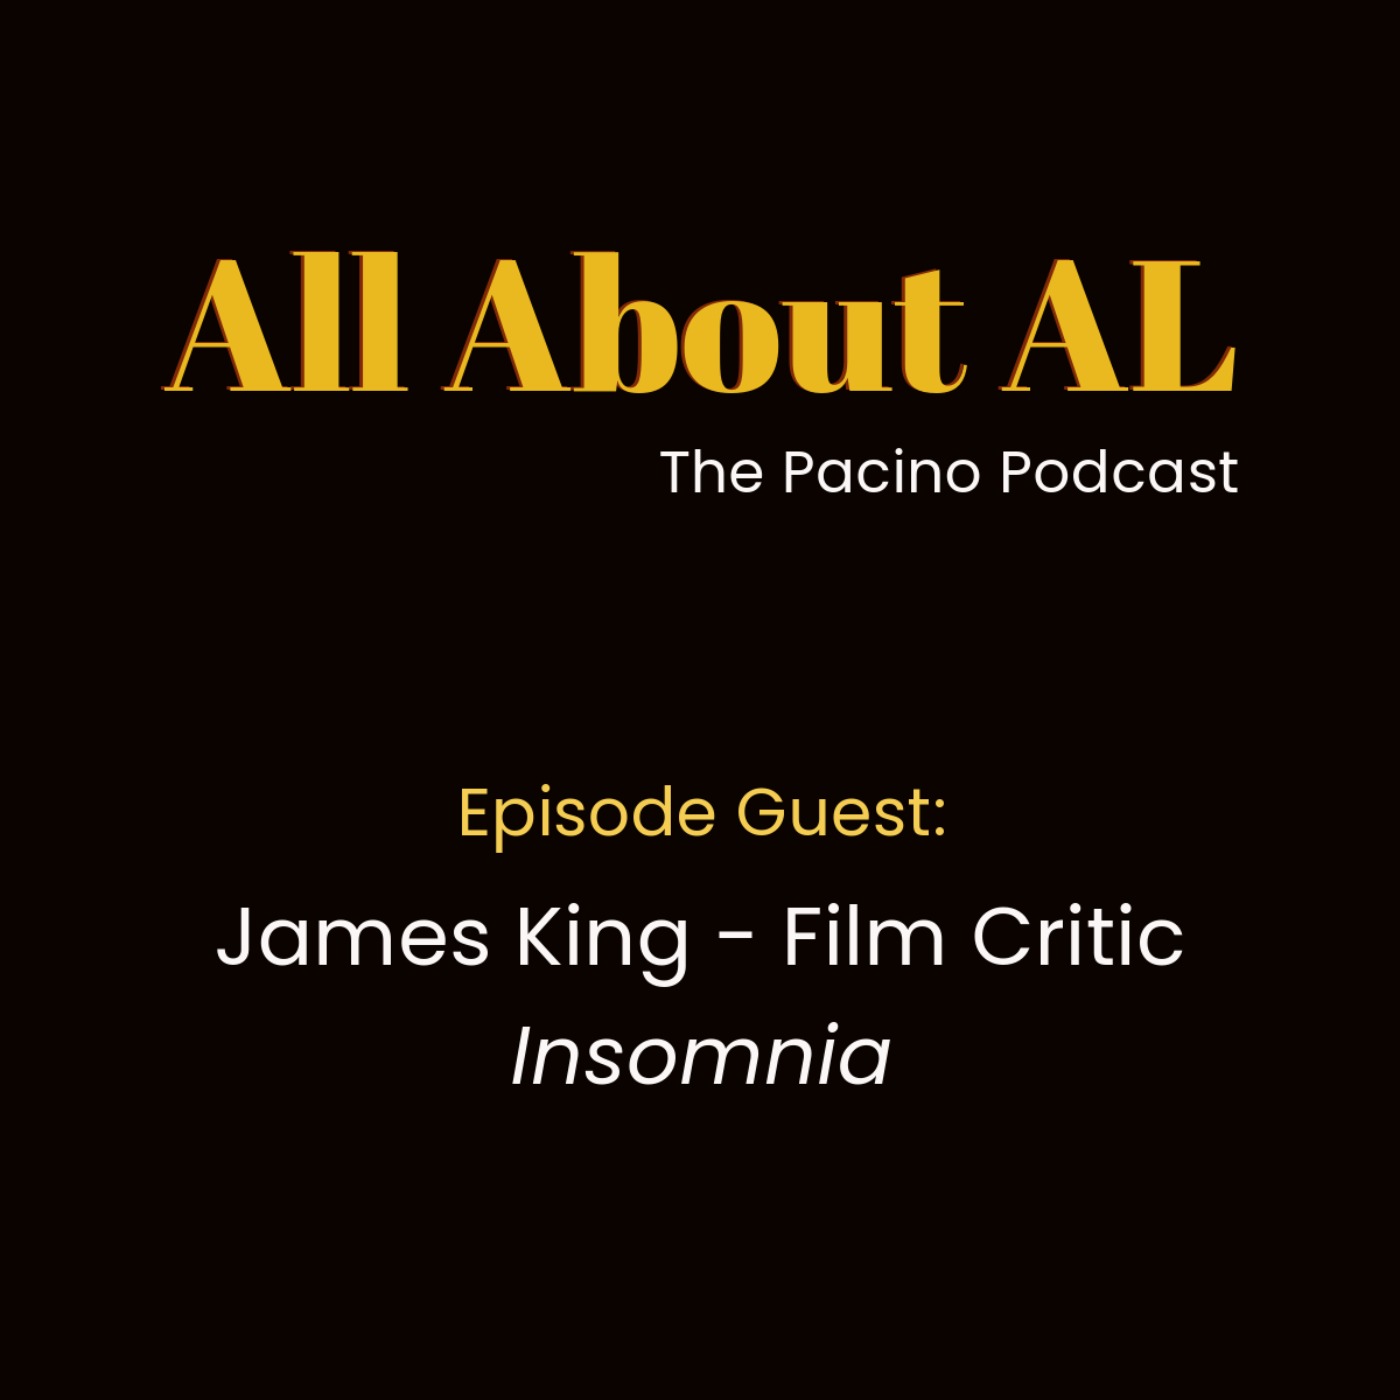 Episode 13: Insomnia with James King